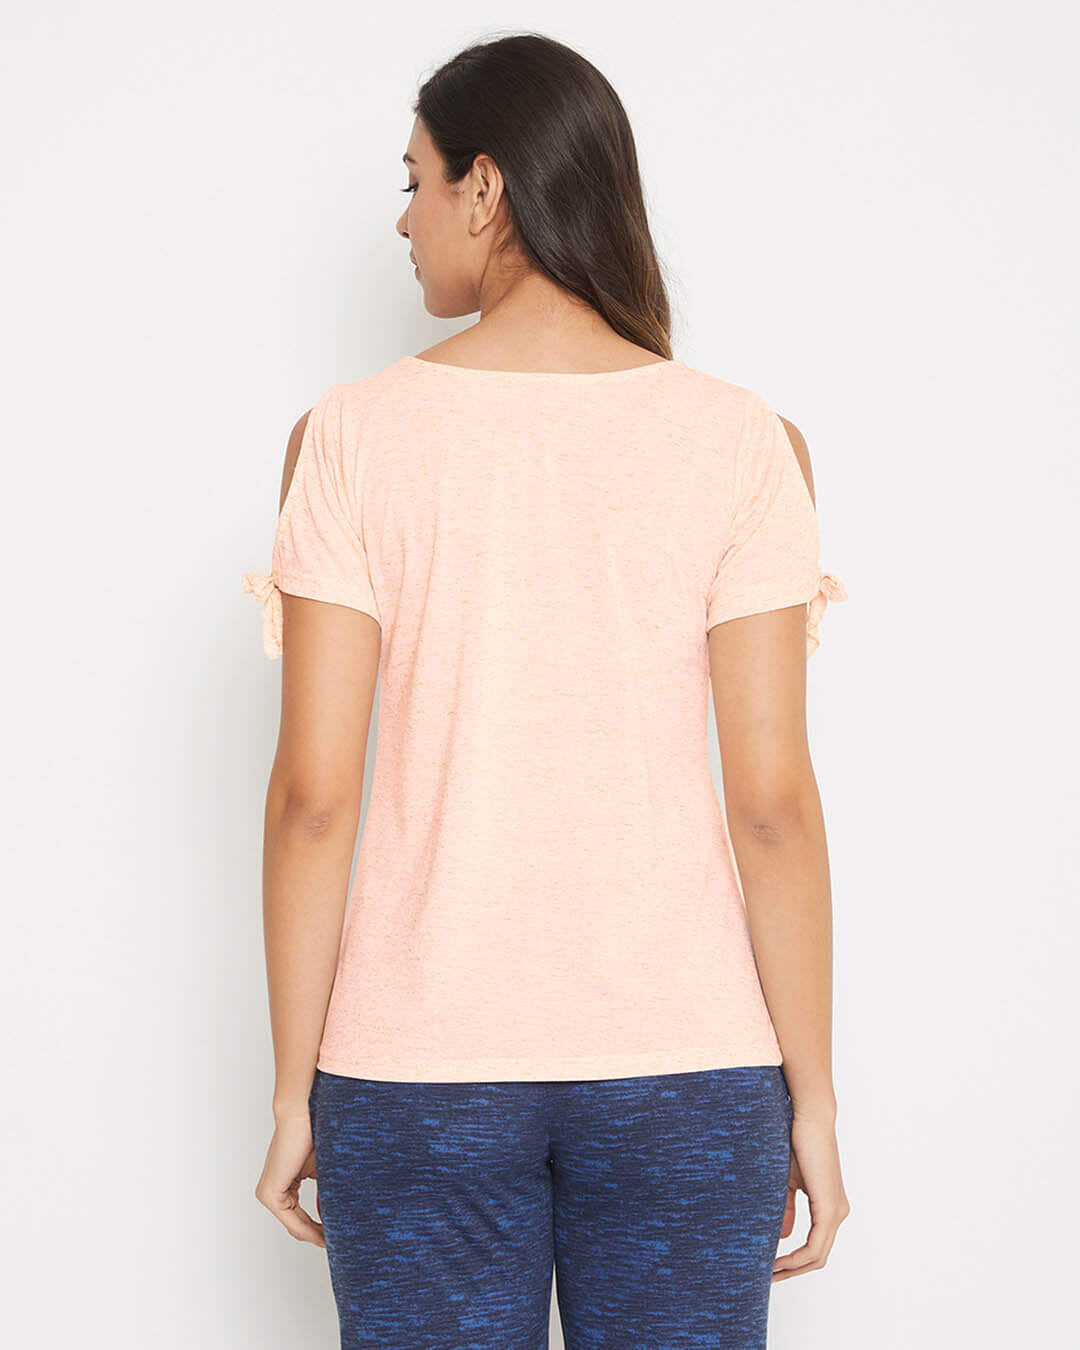 Shop Chic Basic Top In Peach Pink   Cotton Rich-Back